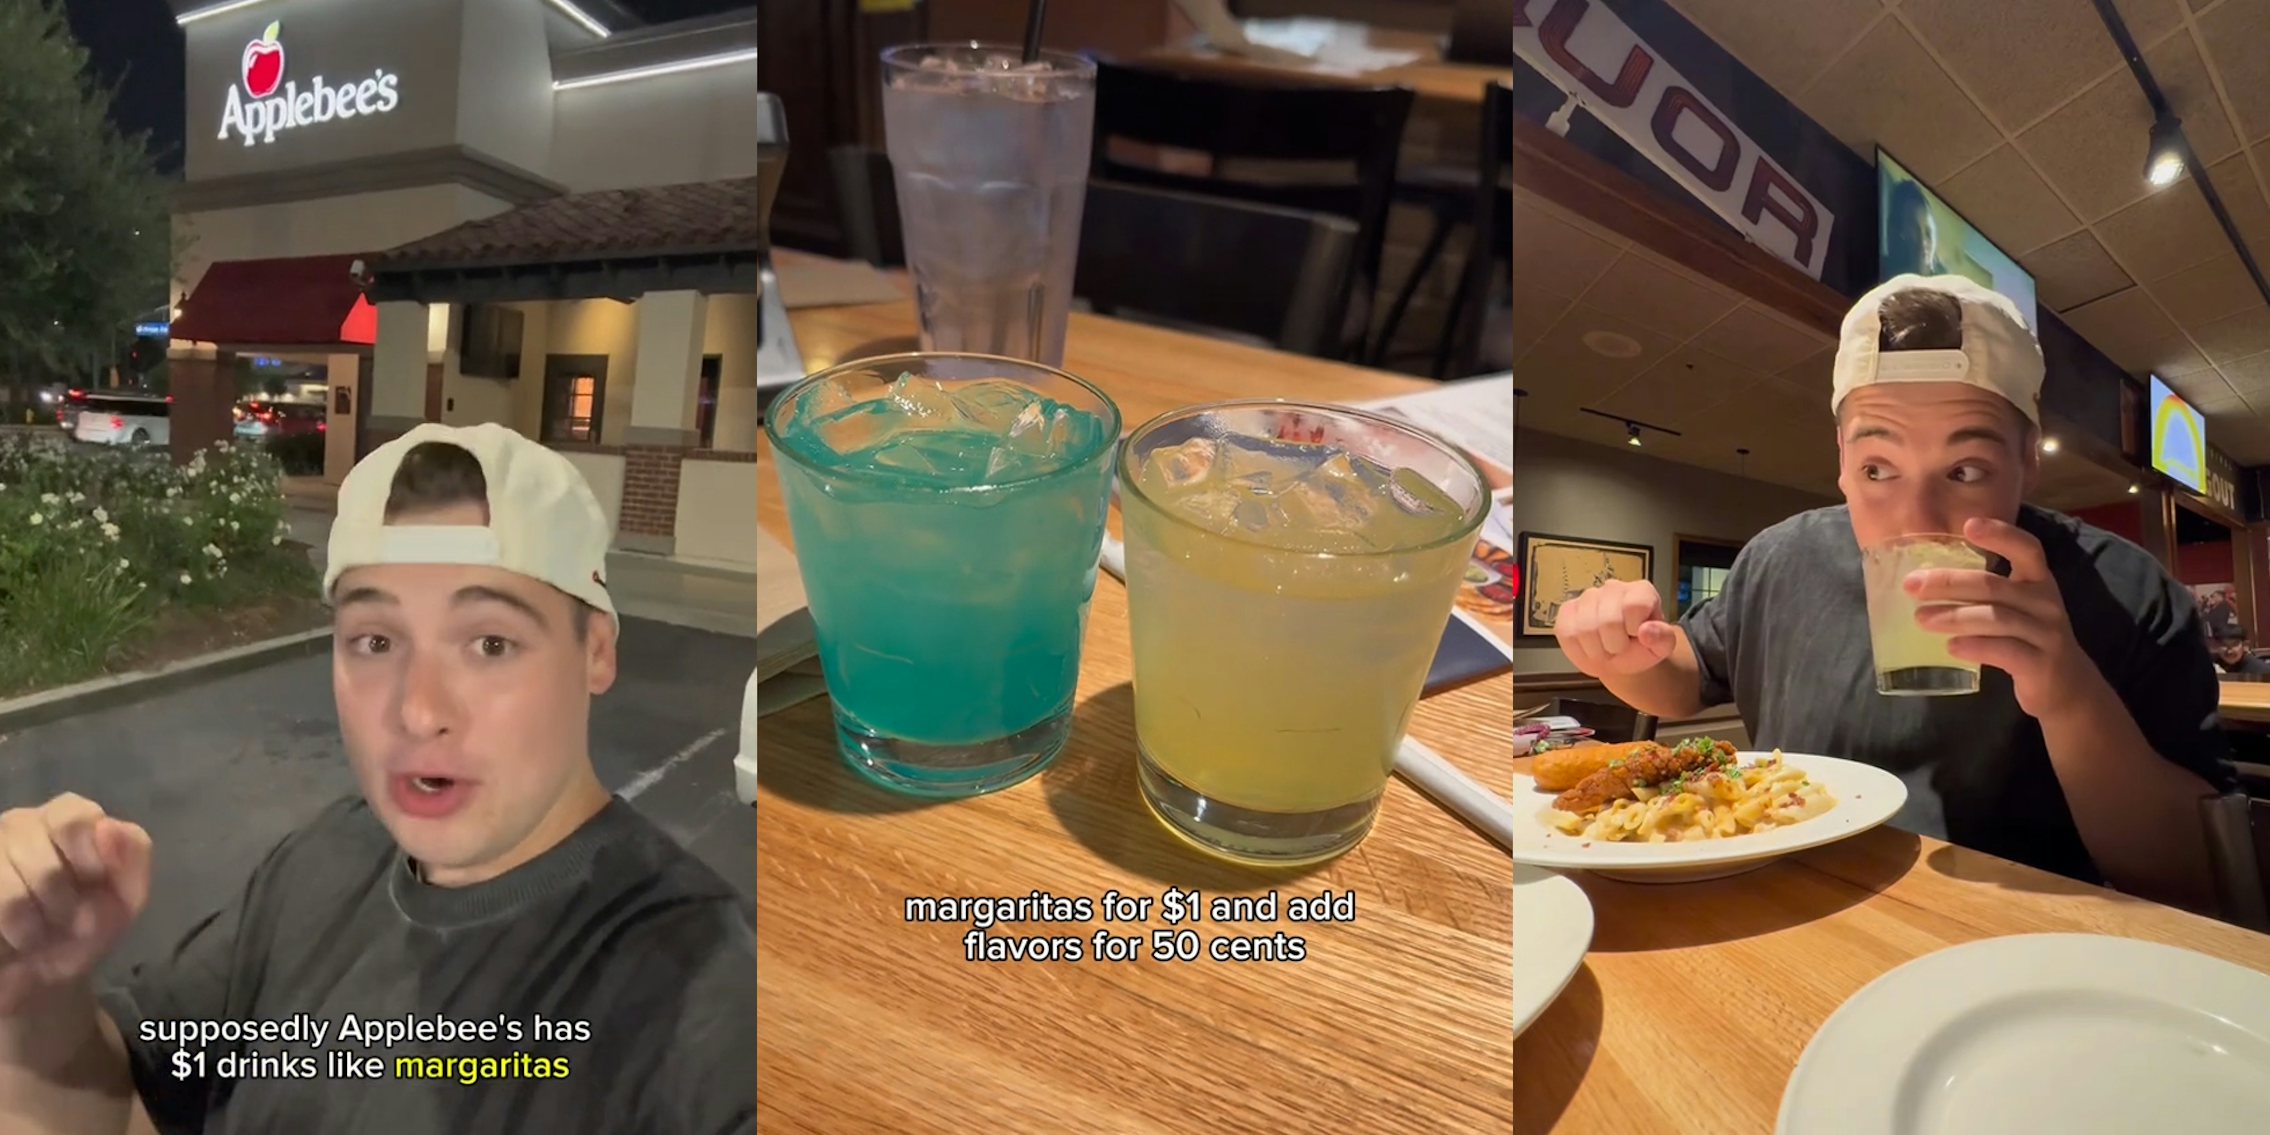 Applebee's customer speaking outside with caption 'supposedly Applebee's has $1 drinks like margaritas' (l) margaritas on table with caption 'margaritas for $1 and add flavors for 50 cents' (c) Applebee's customer drinking (r)